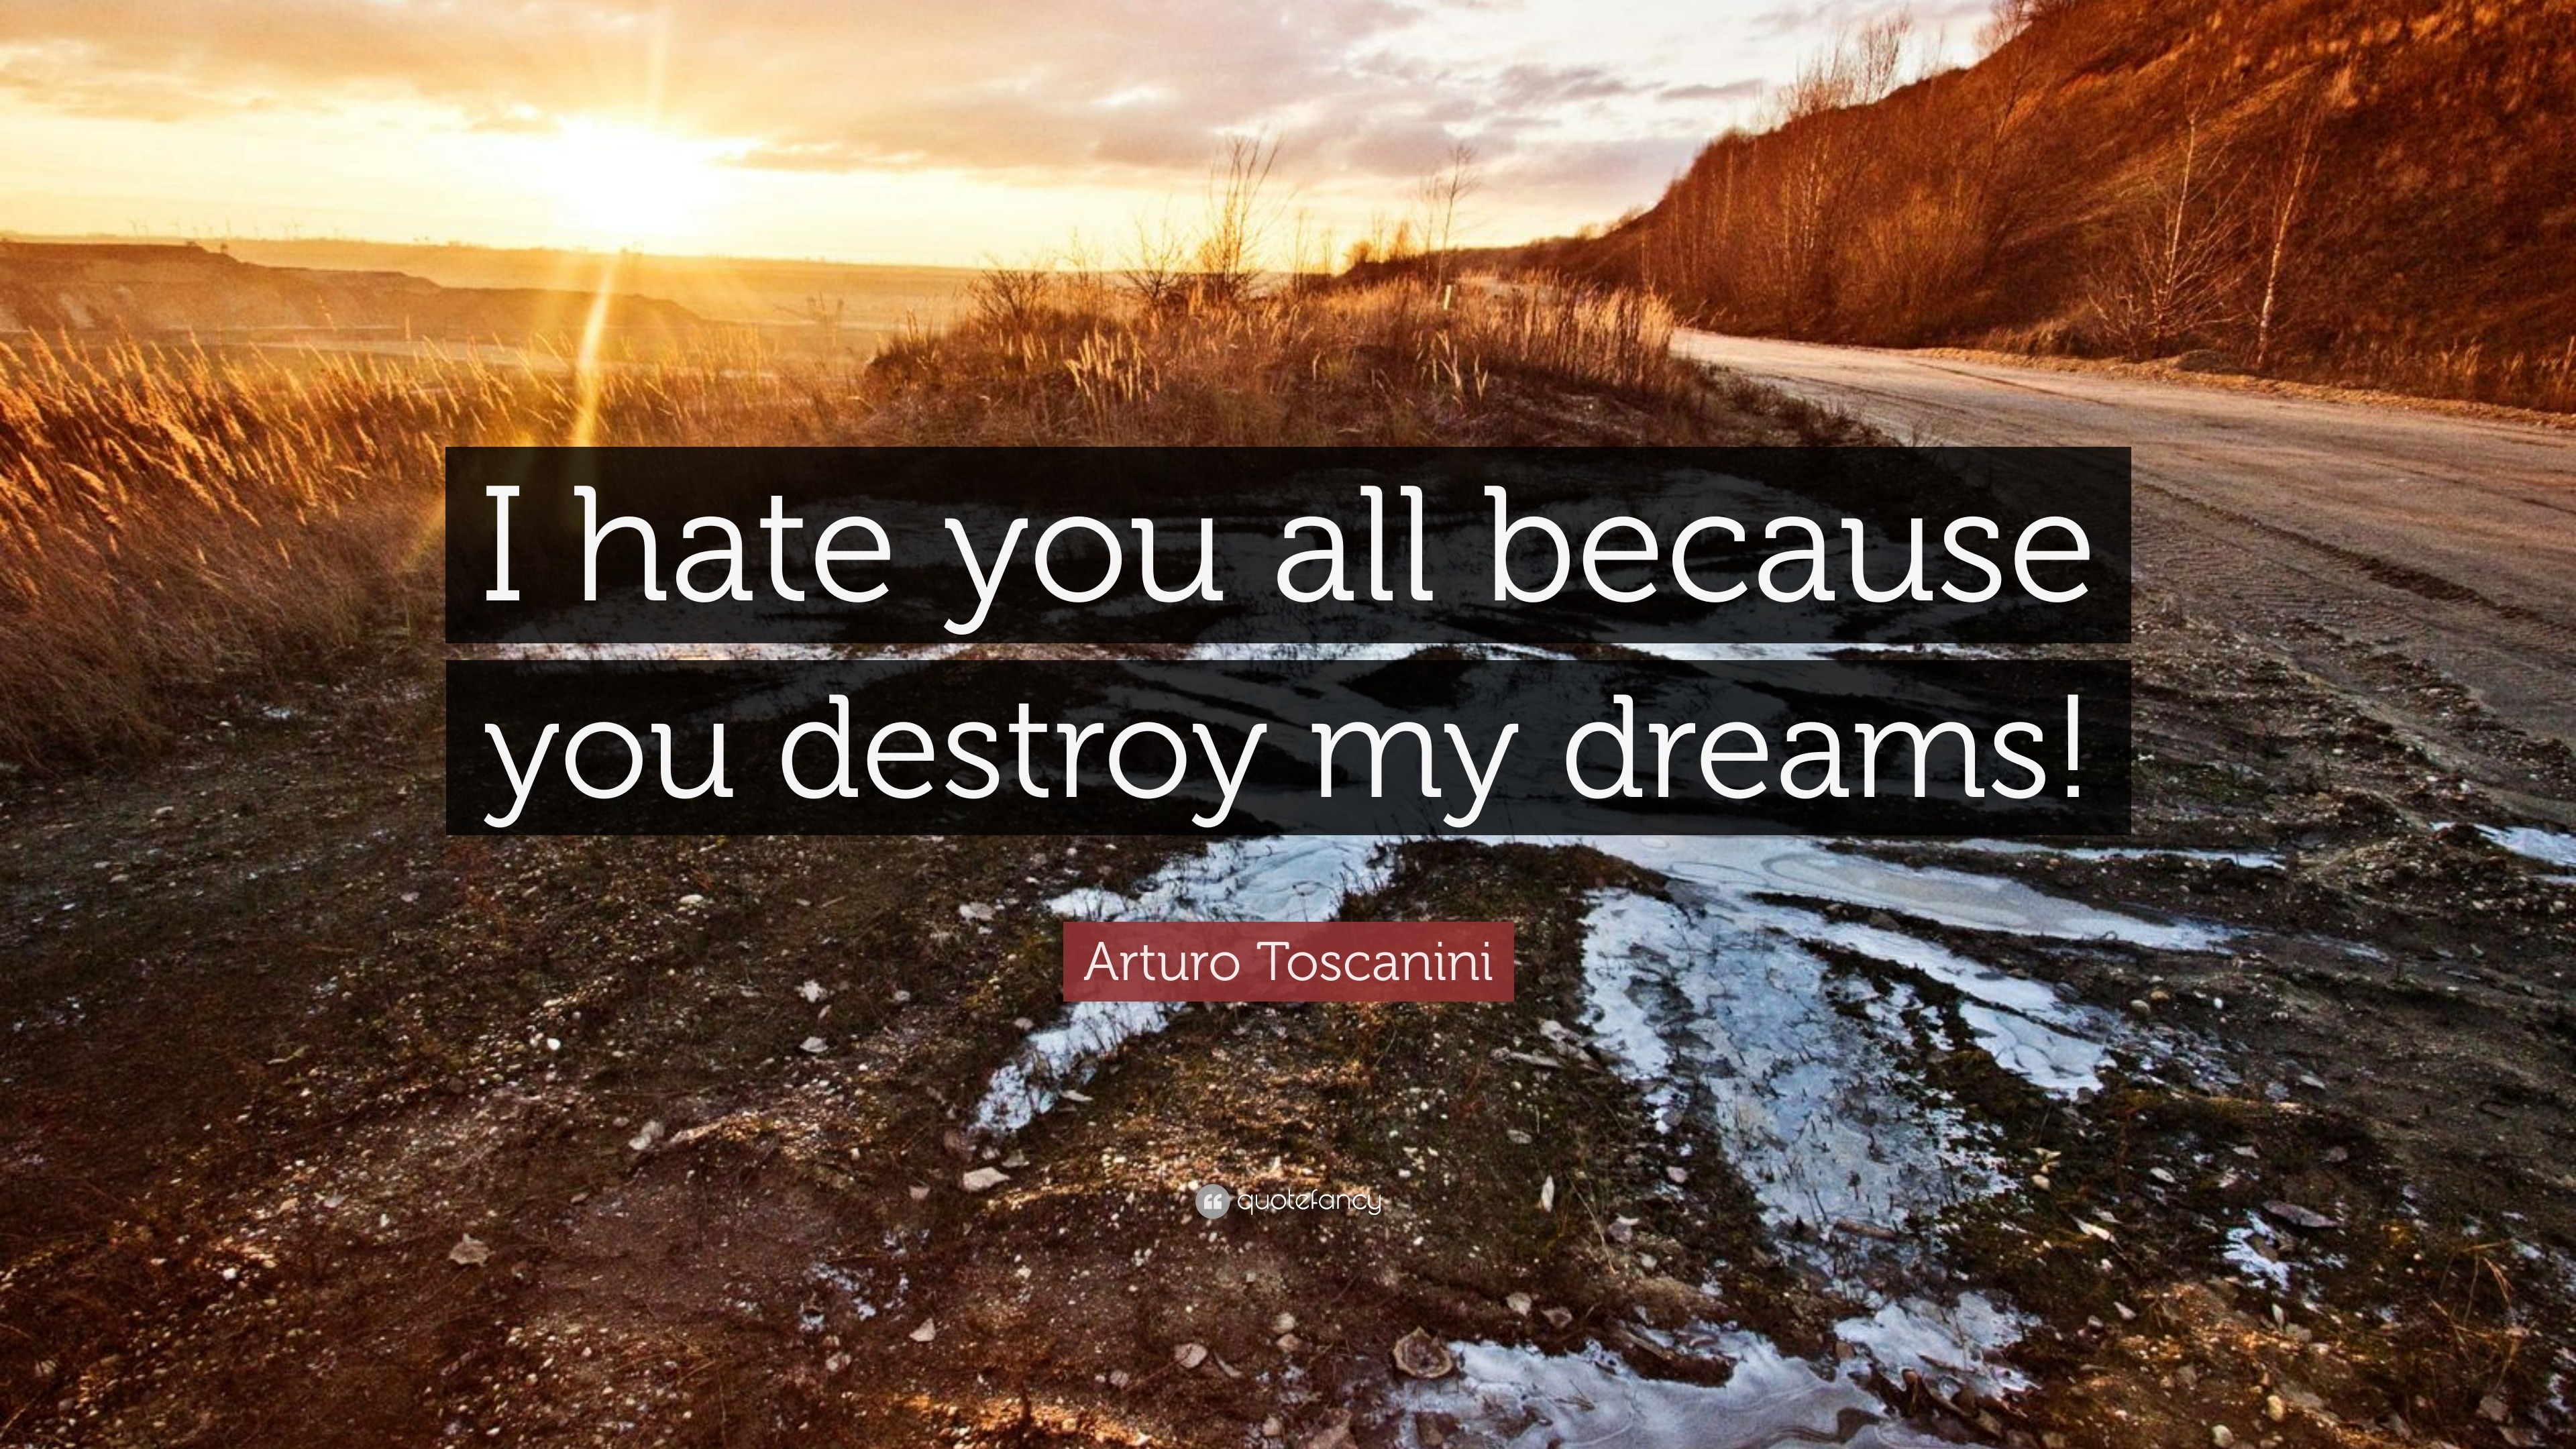 Arturo Toscanini Quote “I hate you all because you destroy my dreams ”